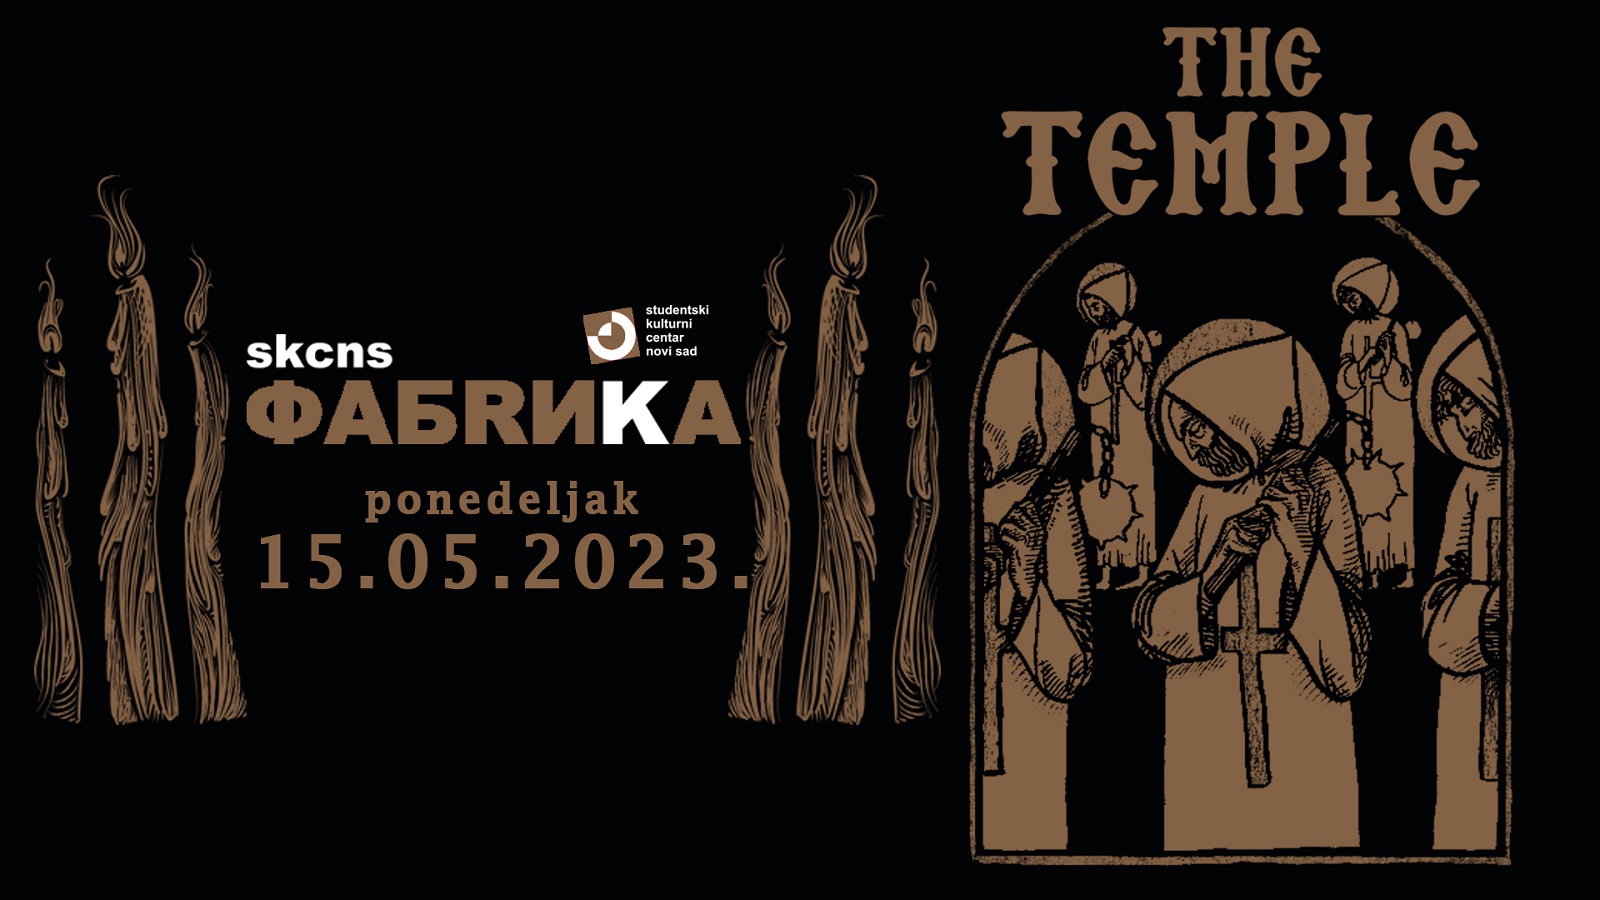 The Temple // SKCNS Fabrika